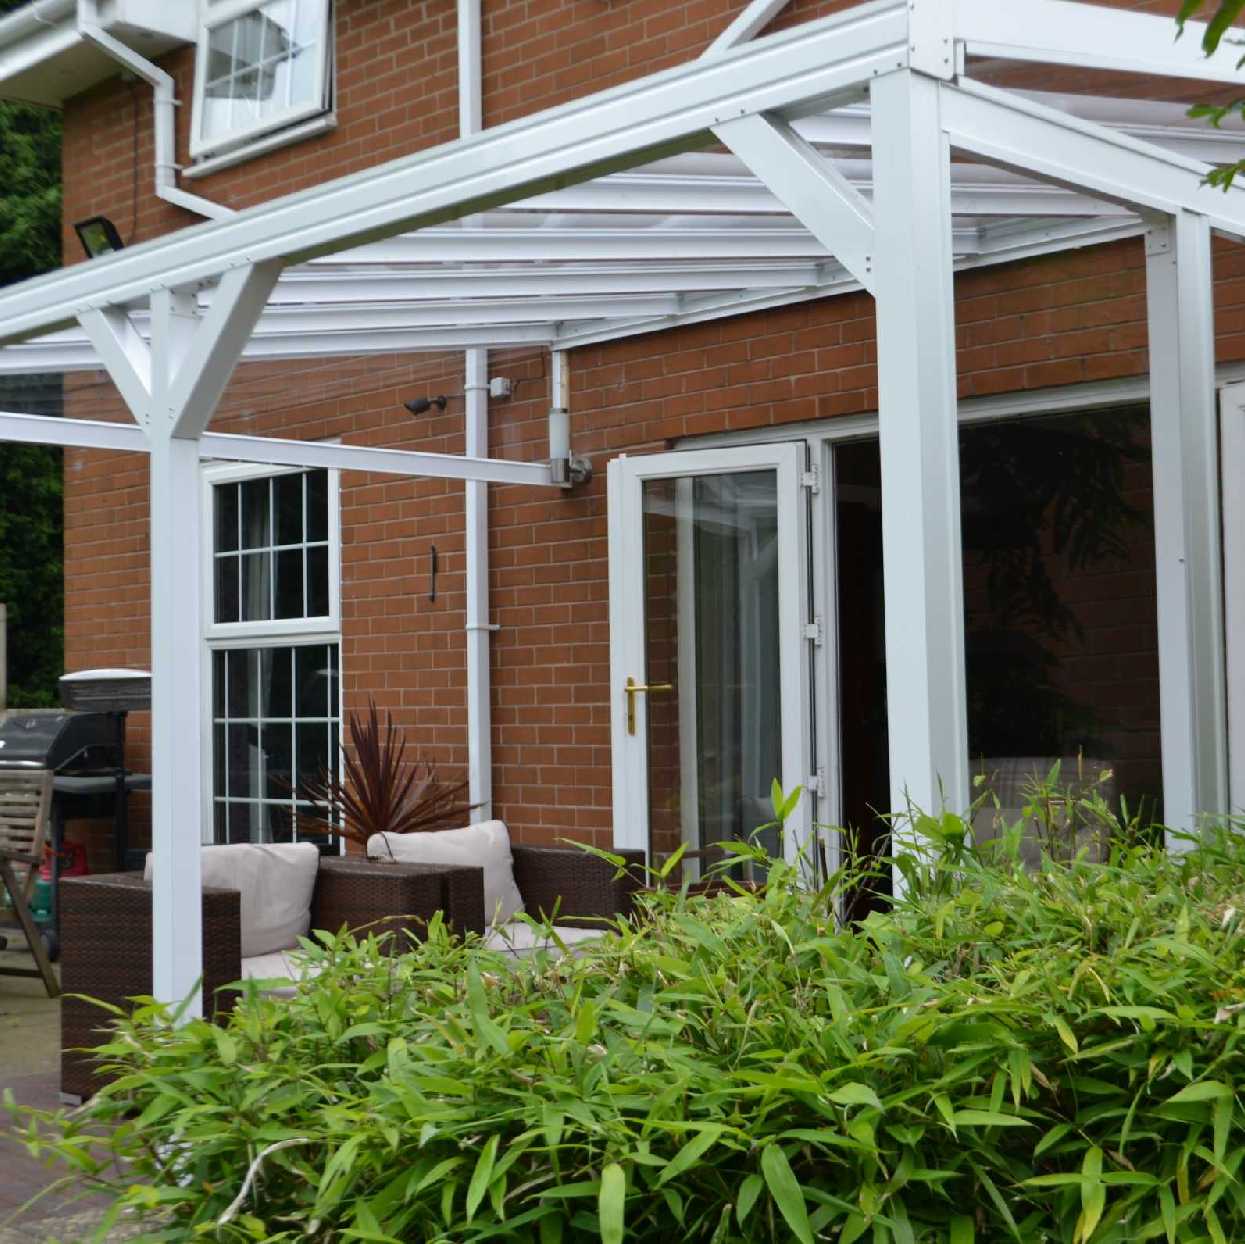 Omega Smart Lean-To Canopy, White with 6mm Glass Clear Plate Polycarbonate Glazing - 8.4m (W) x 2.0m (P), (4) Supporting Posts from Omega Build